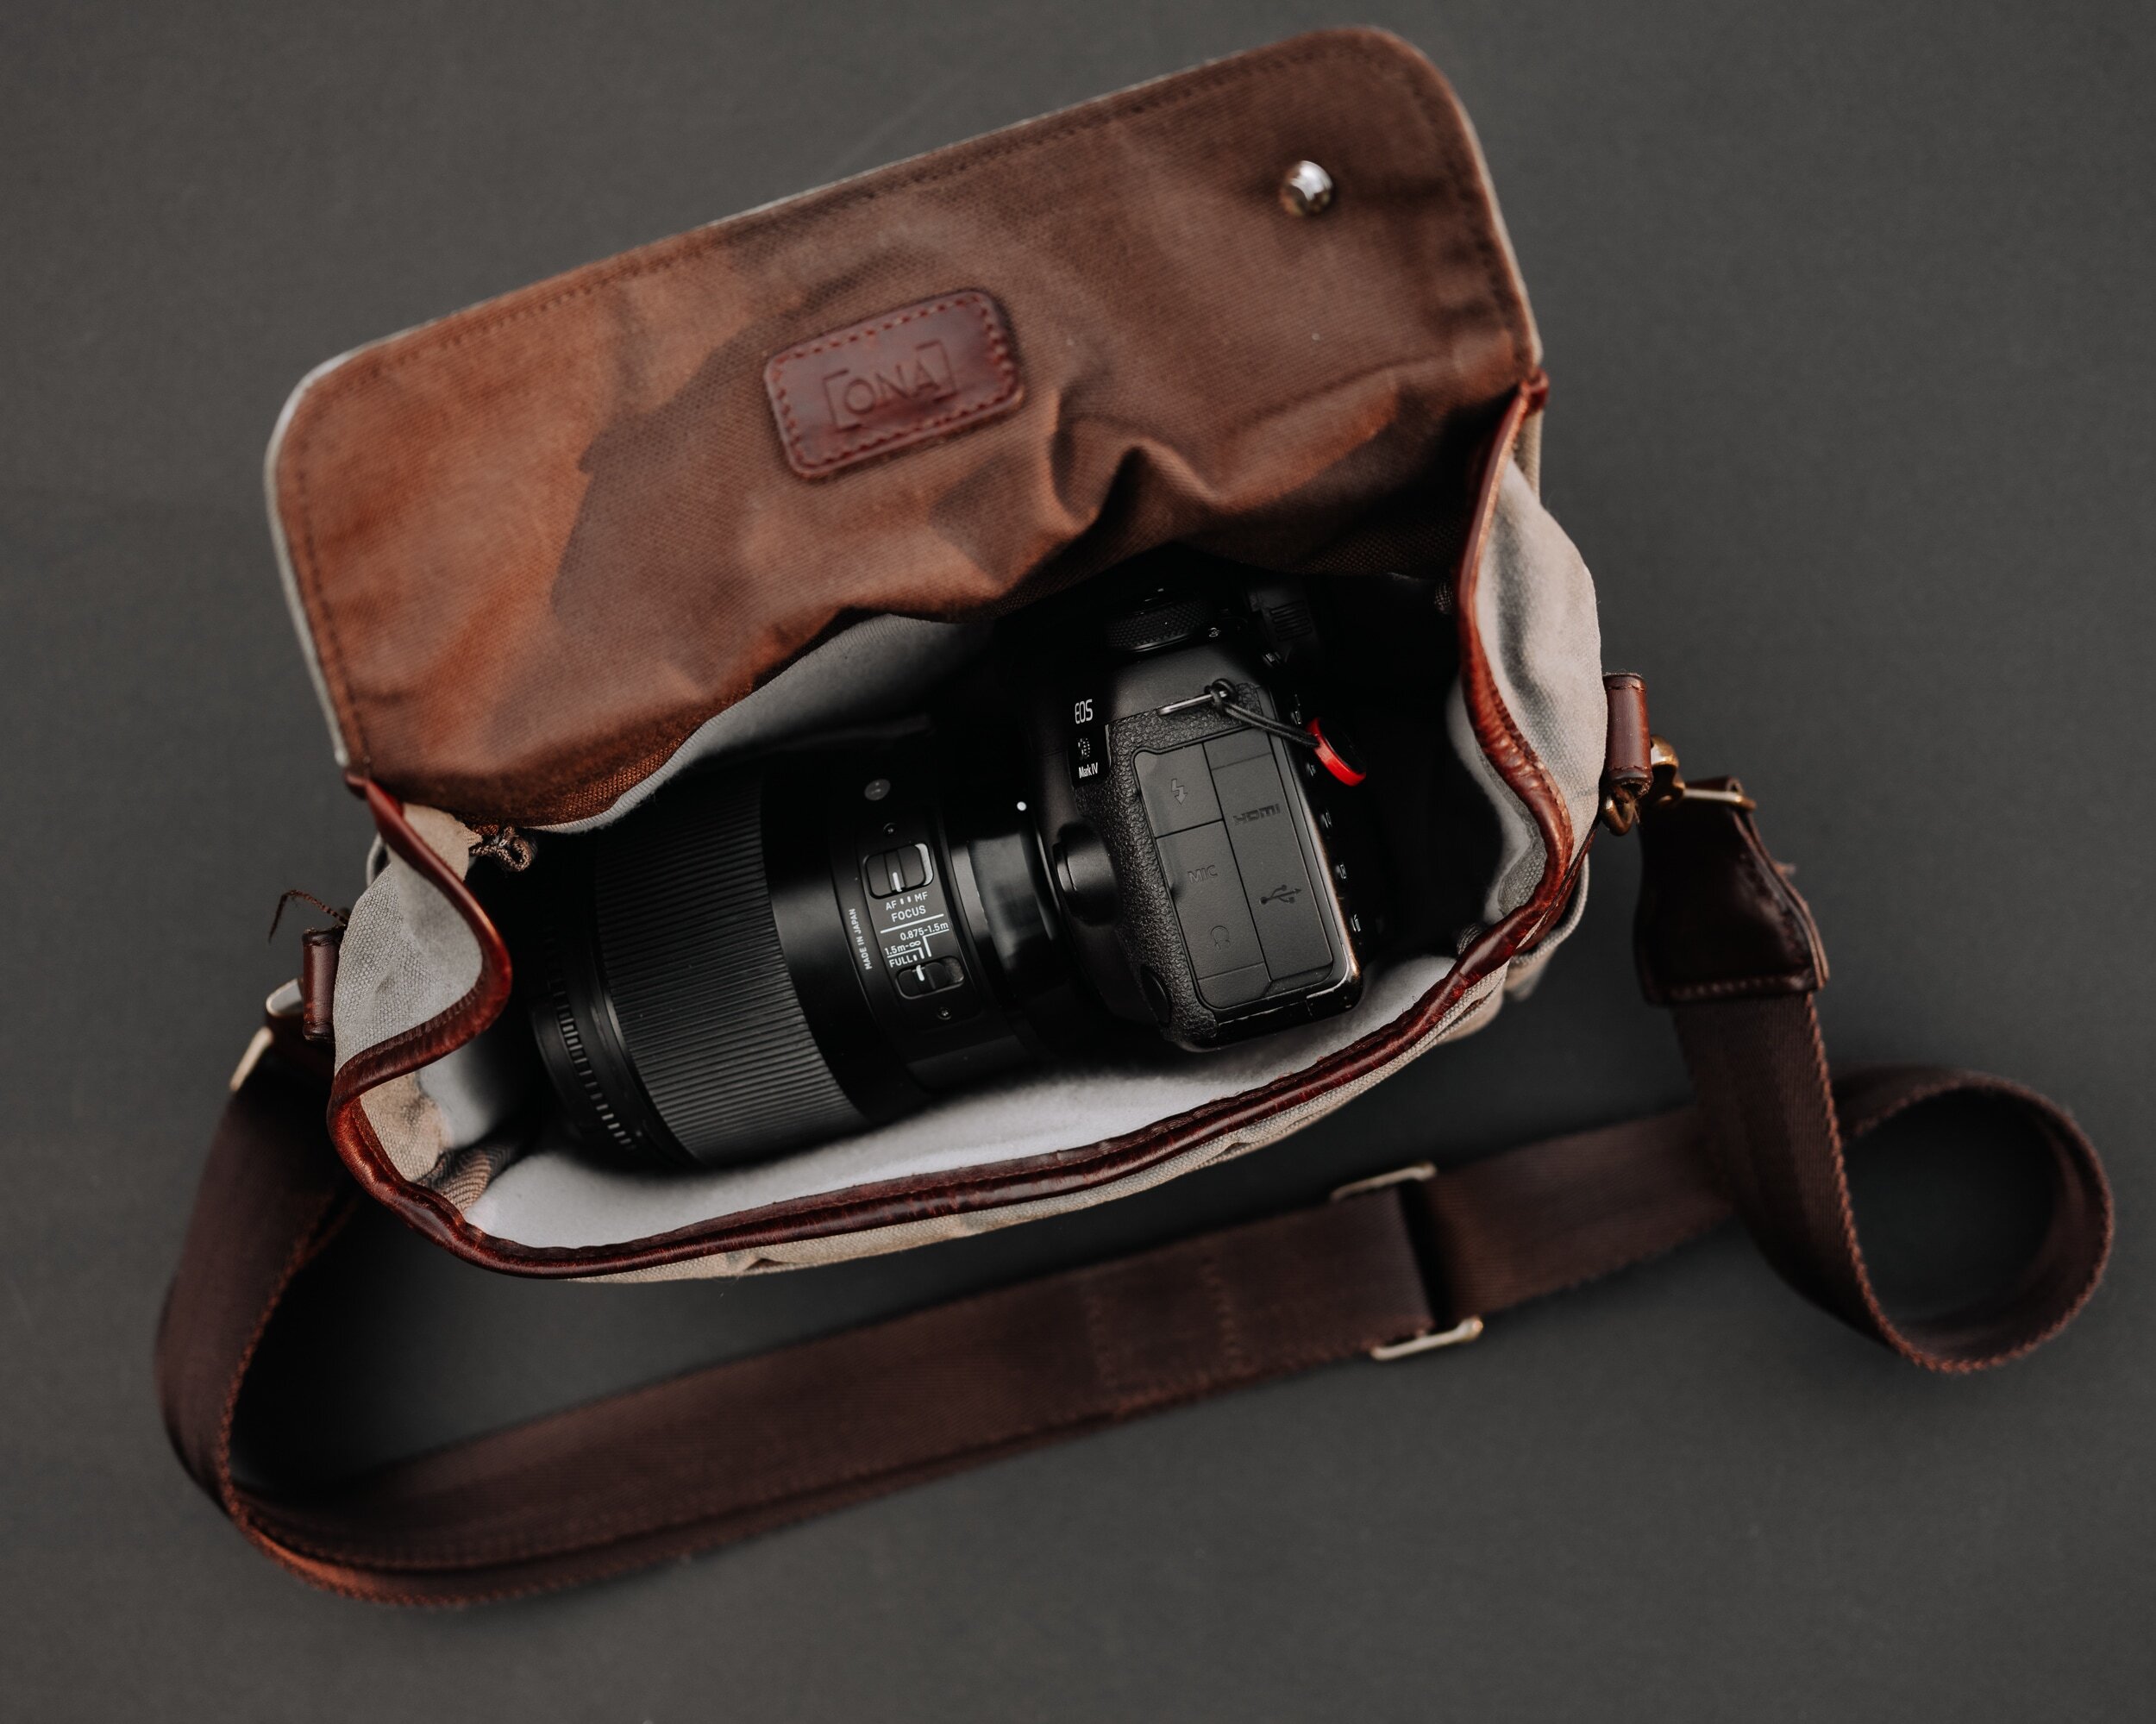 Review: The ONA Bowery Bag for Everyday Photography